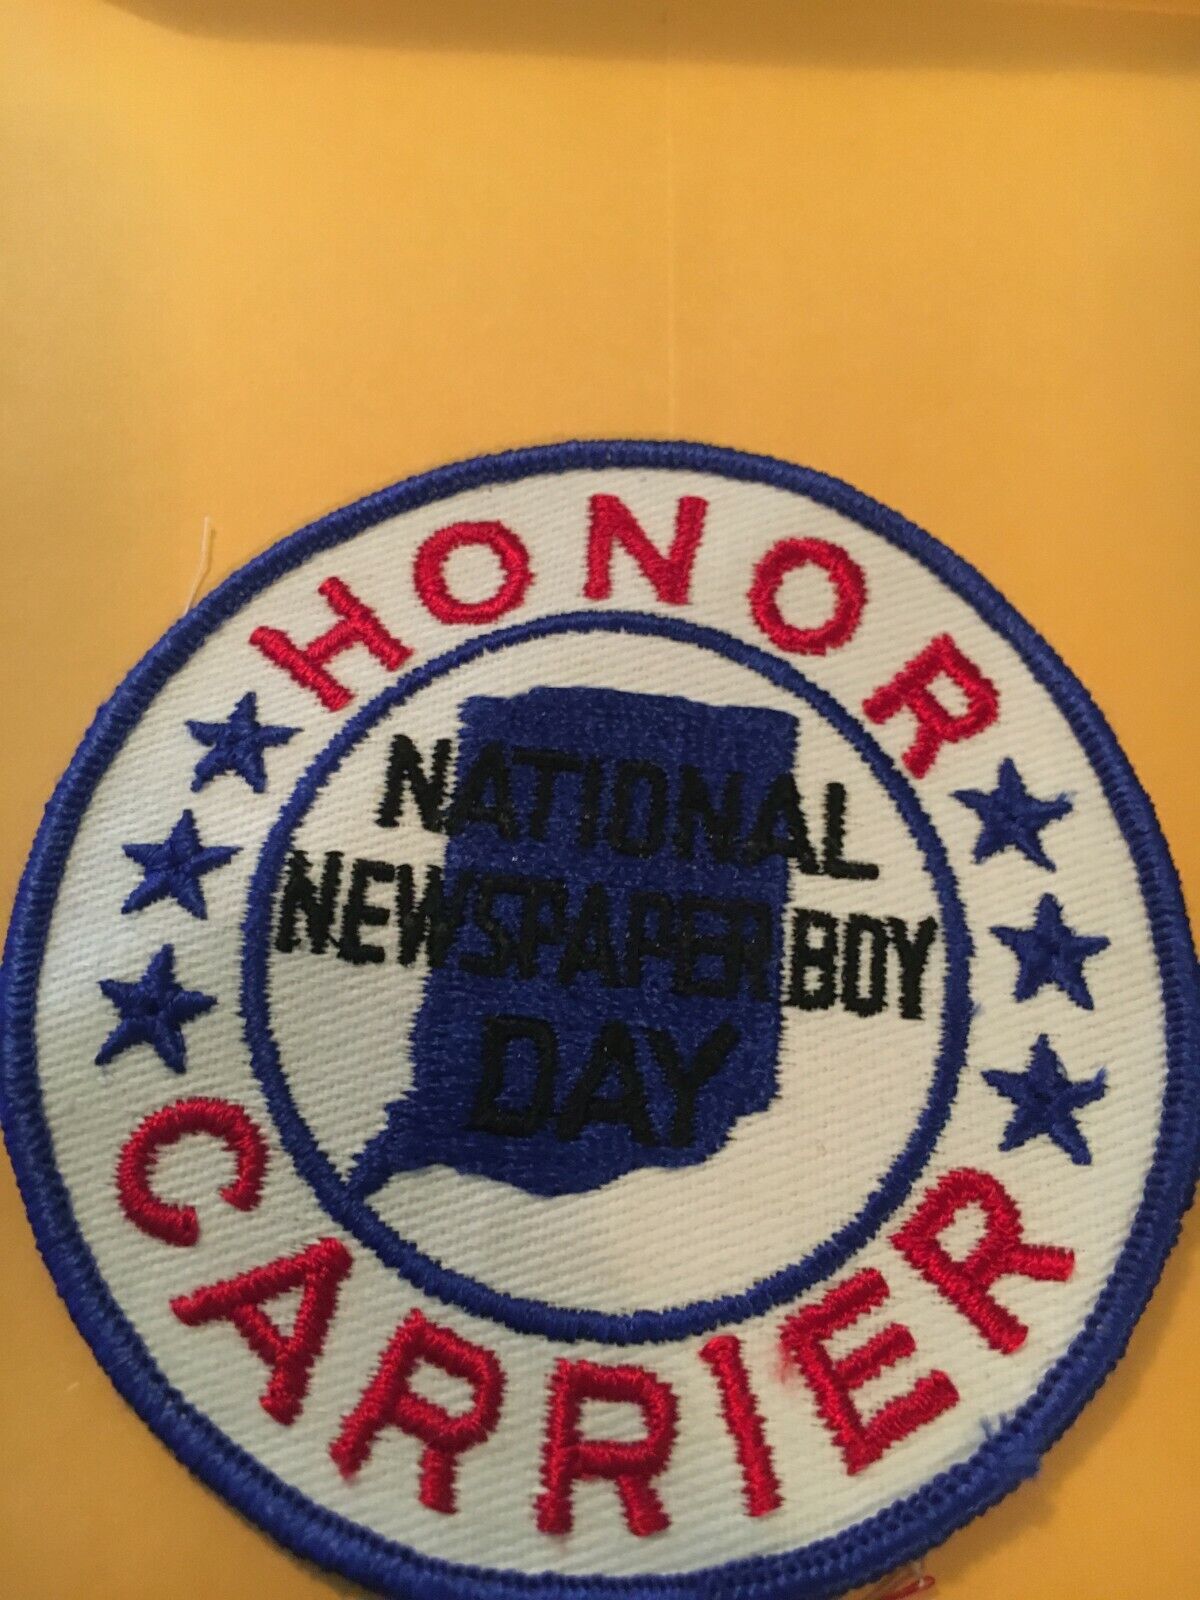 Rare Vintage National Newspaper Boy Honor Carrier Patch Indiana